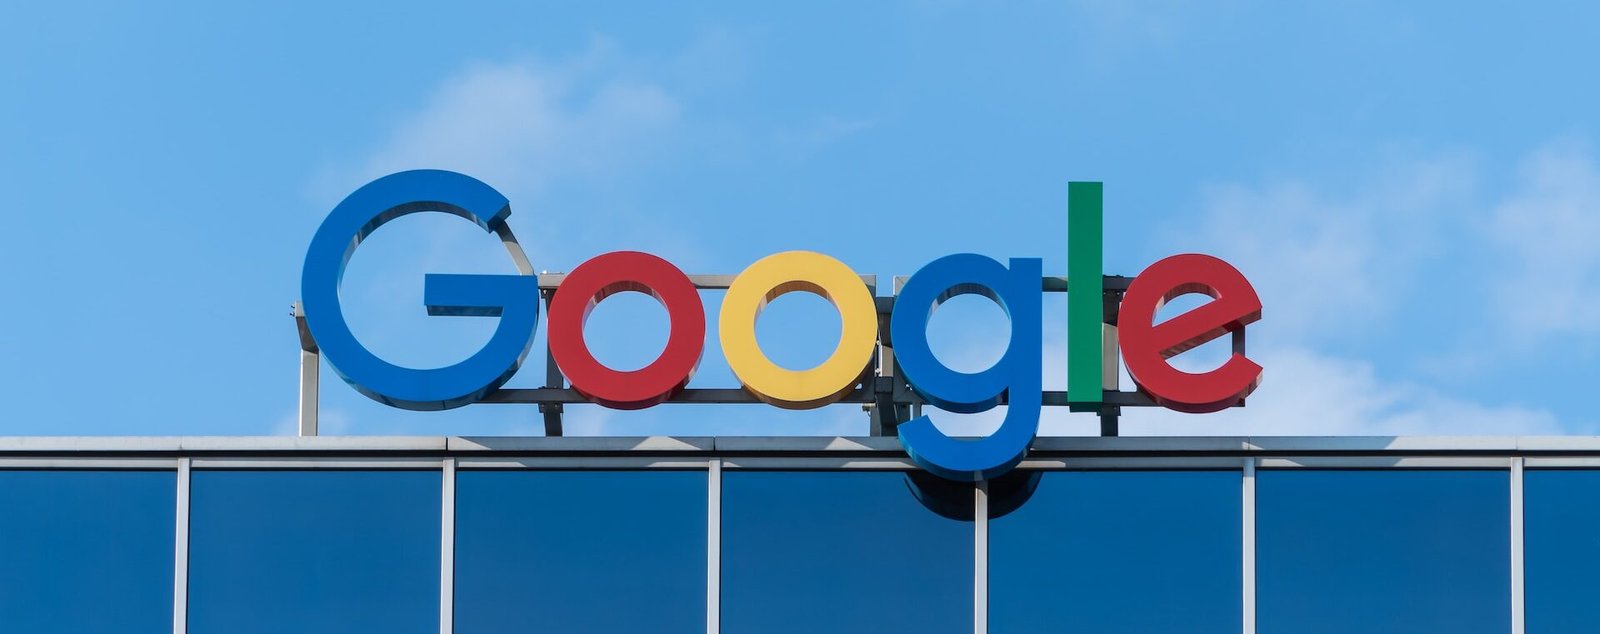 Google allows more app payment options in antitrust deal with states